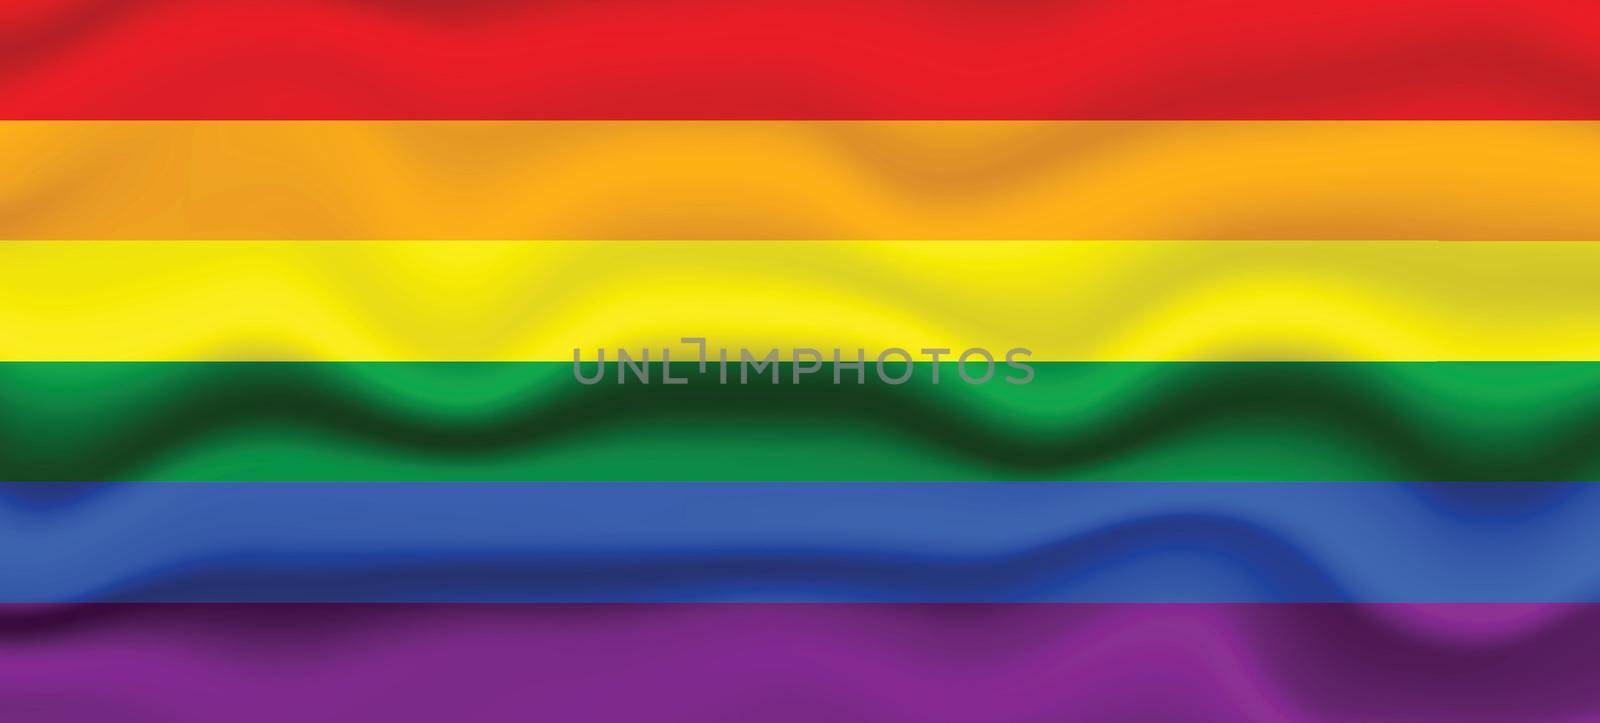 Flag LGBT squared icon, badge or button. Template design, vector illustration. Love wins. LGBT symbol in rainbow colors. Gay pride silk textile background by allaku